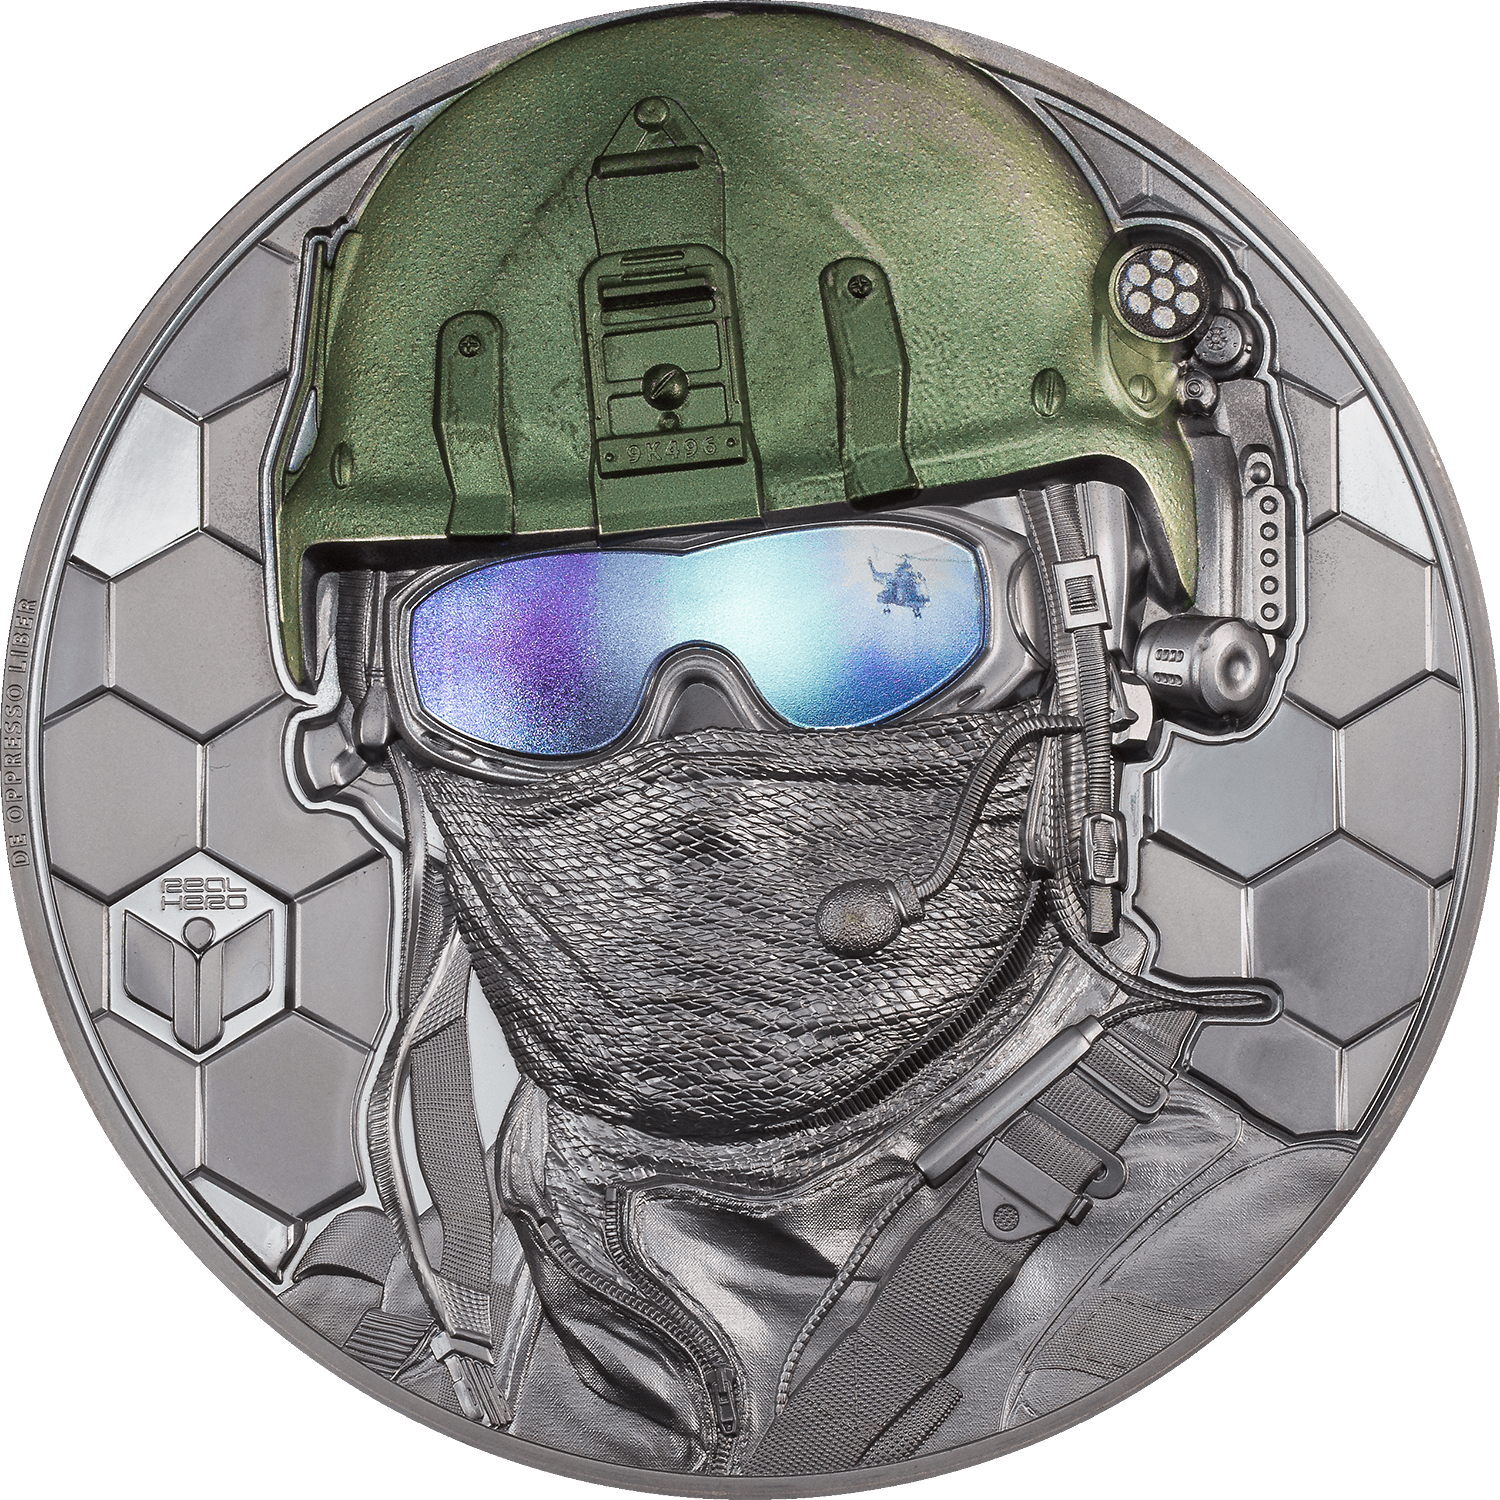 SPECIAL FORCES Real Heroes 1 Kg Kilo Silver Coin $100 Cook Islands 2022 - PARTHAVA COIN